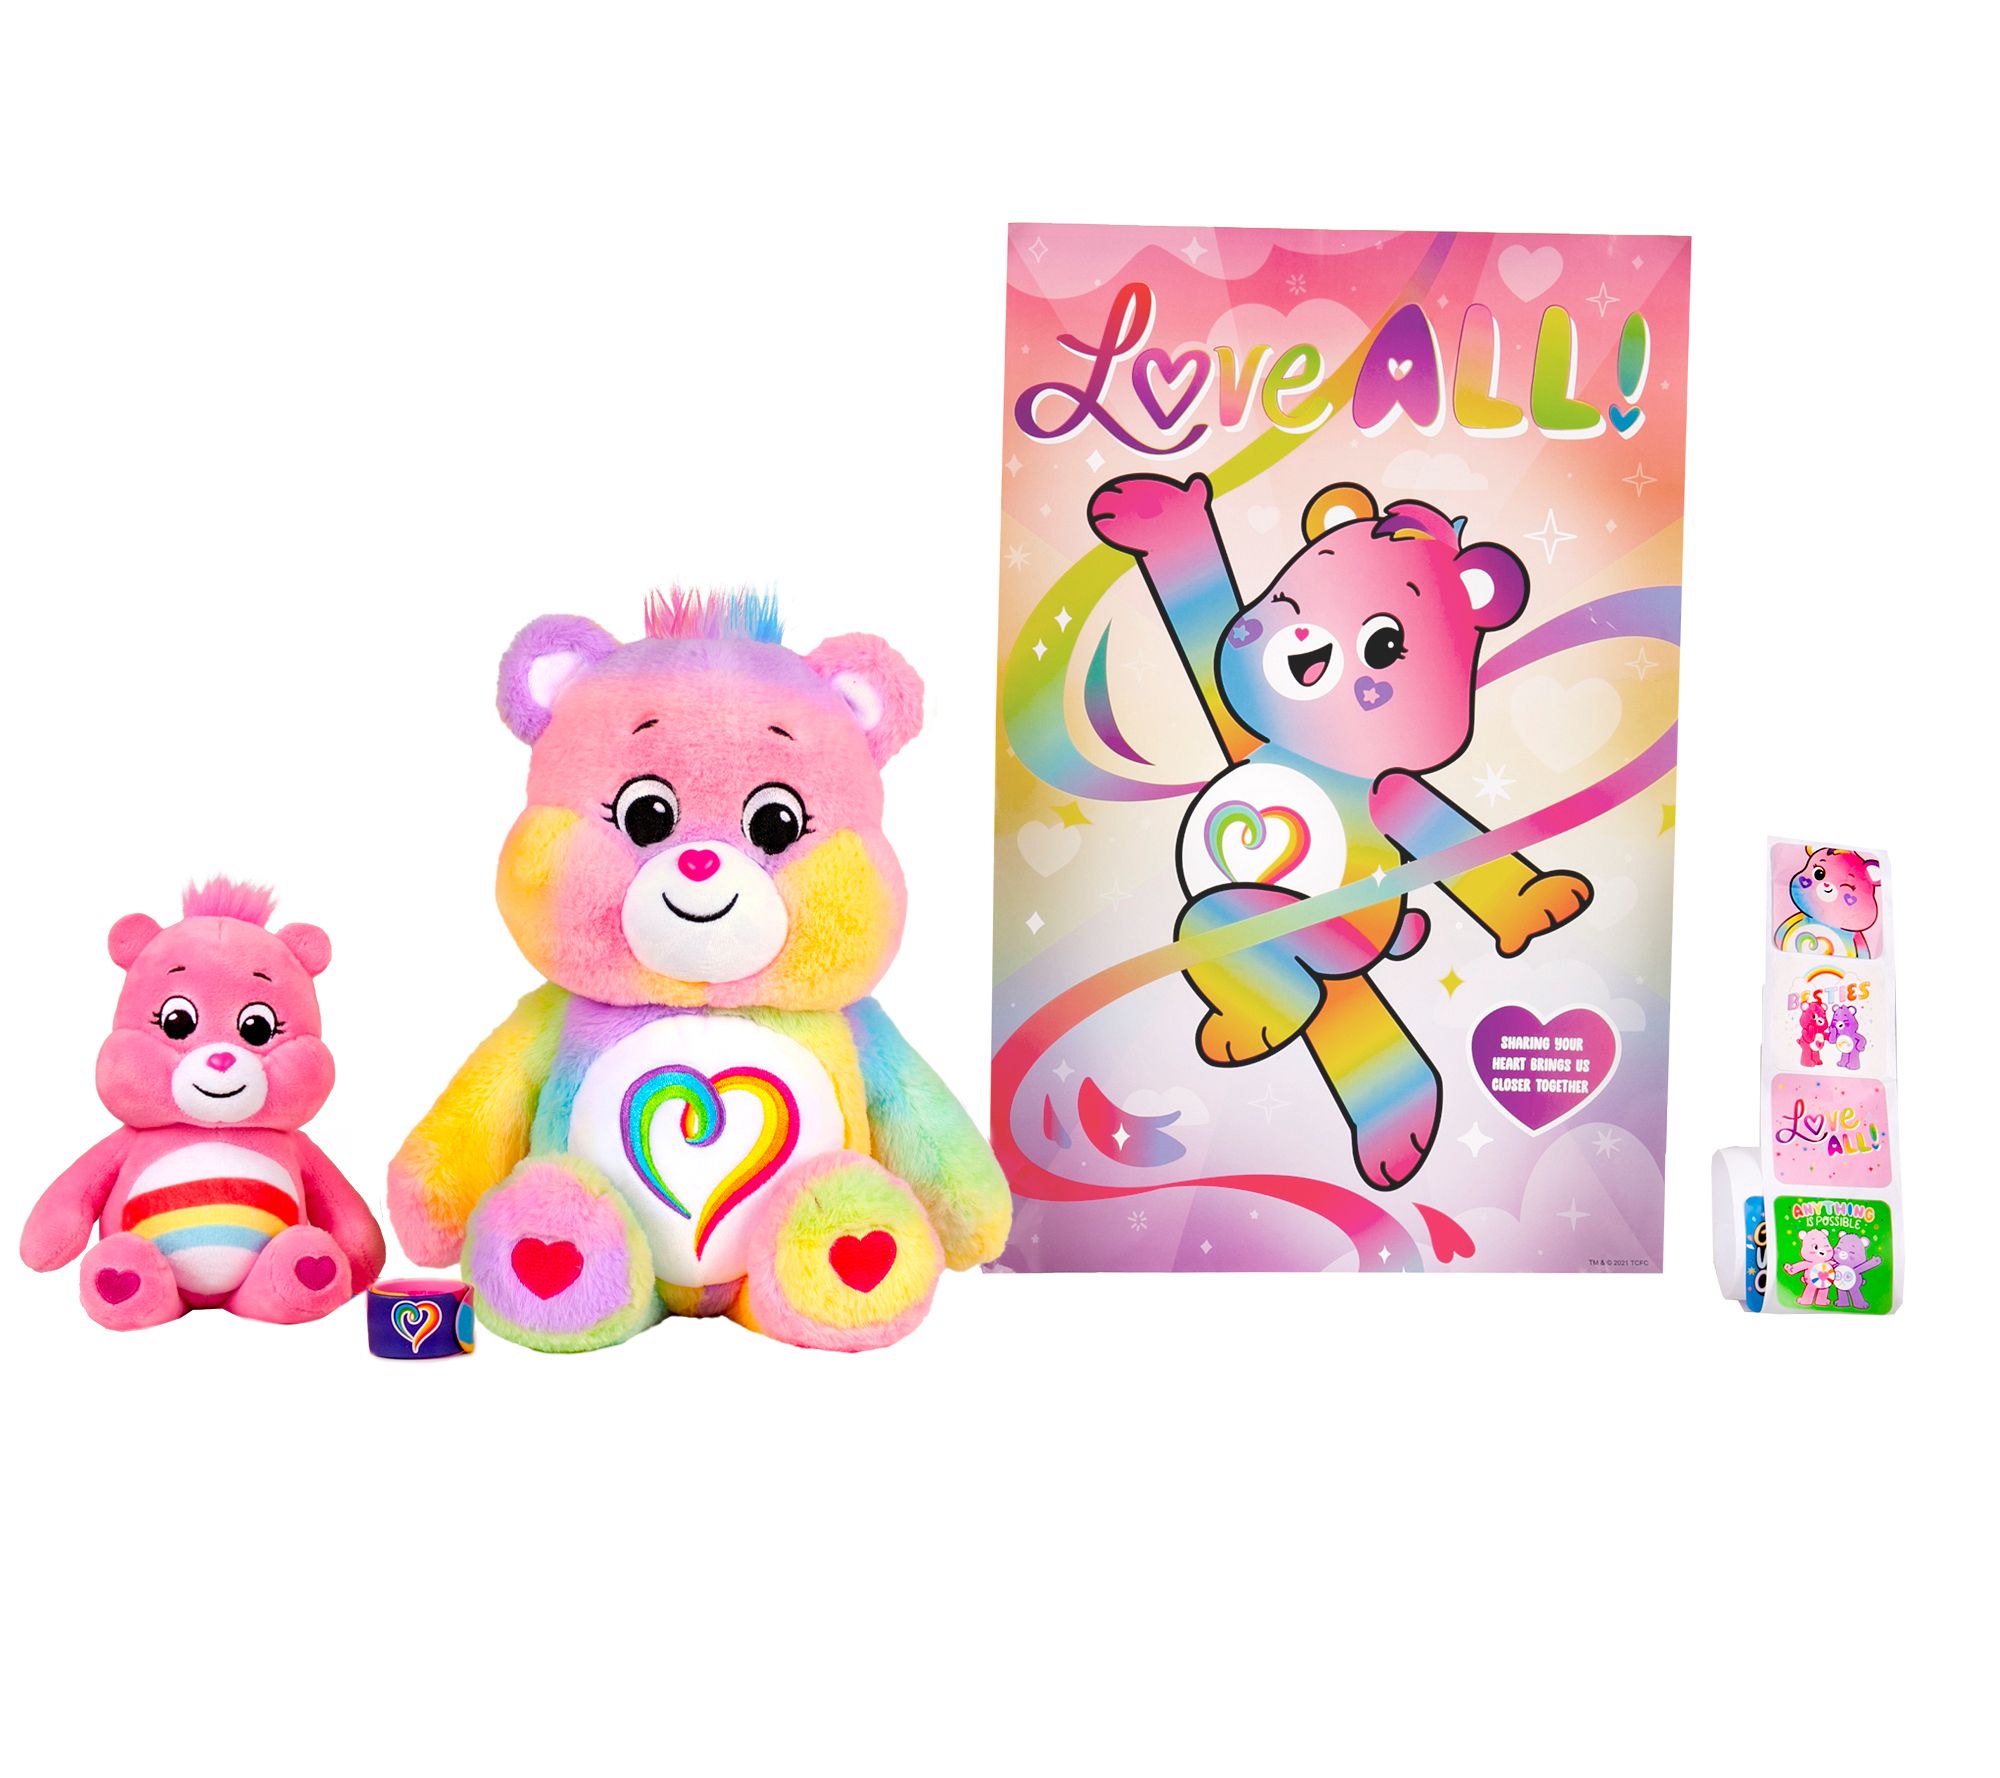 Heart Of Gold Care Bears 25th Anniversary Limited Model Plush Toy　FROM　JAPAN 